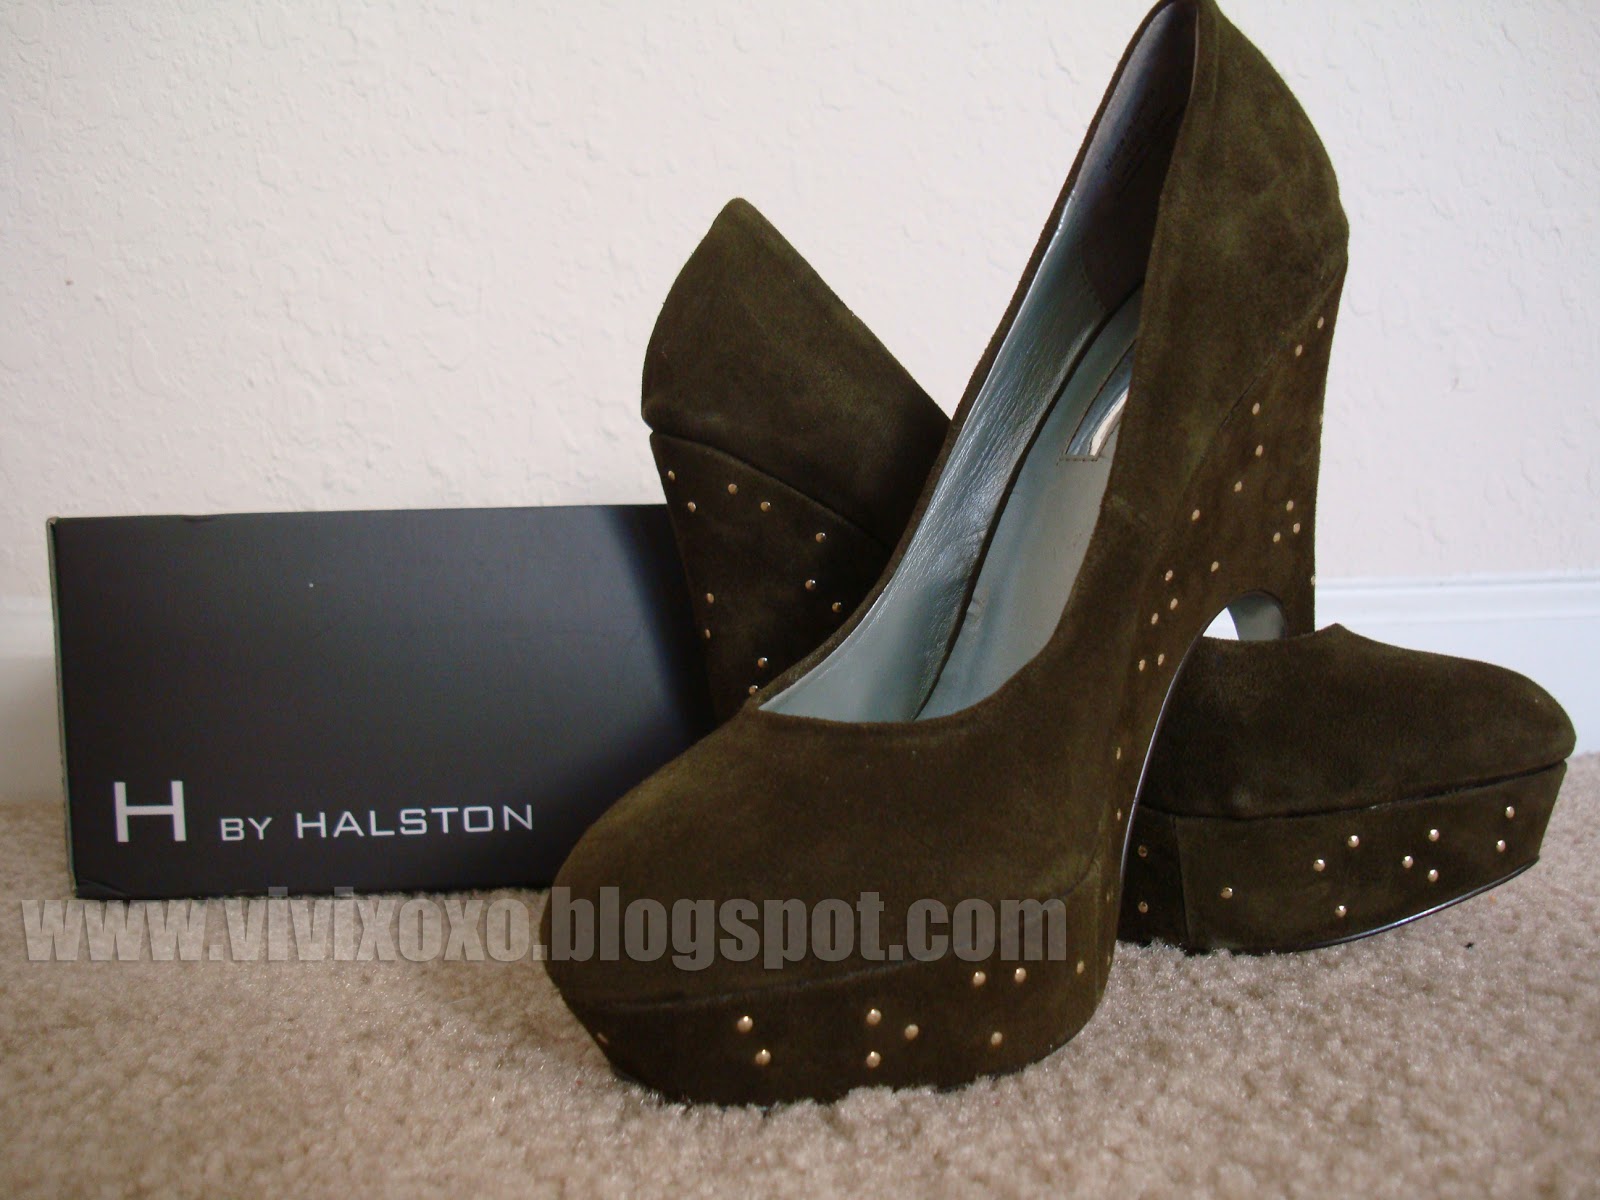 Its by H by Halston,